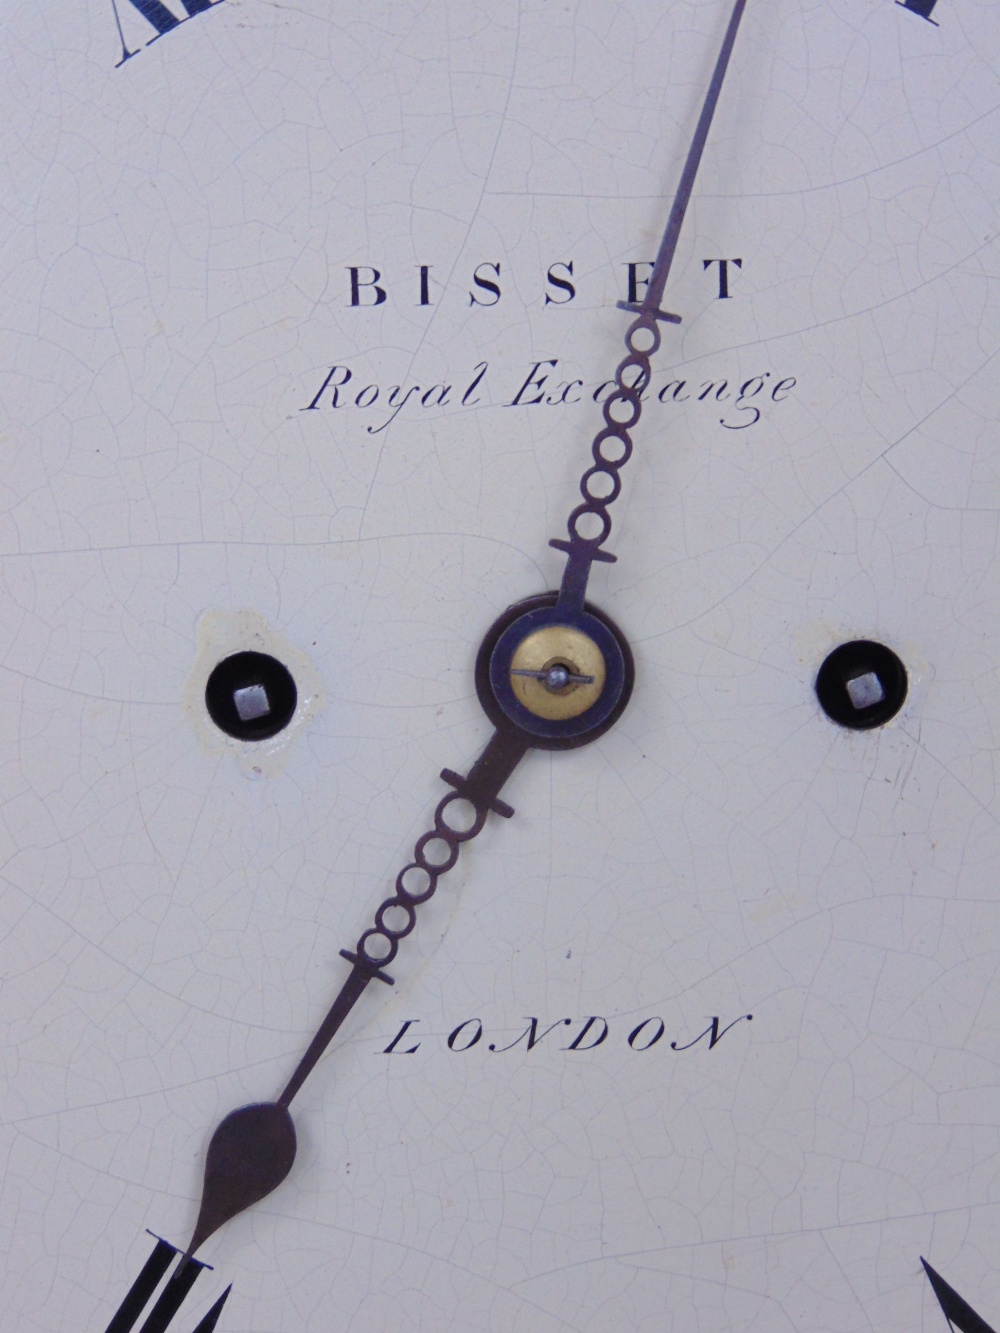 Regency double fuse bracket clock by Bisset, Royal Exchange, London, the architectural flame - Image 2 of 9